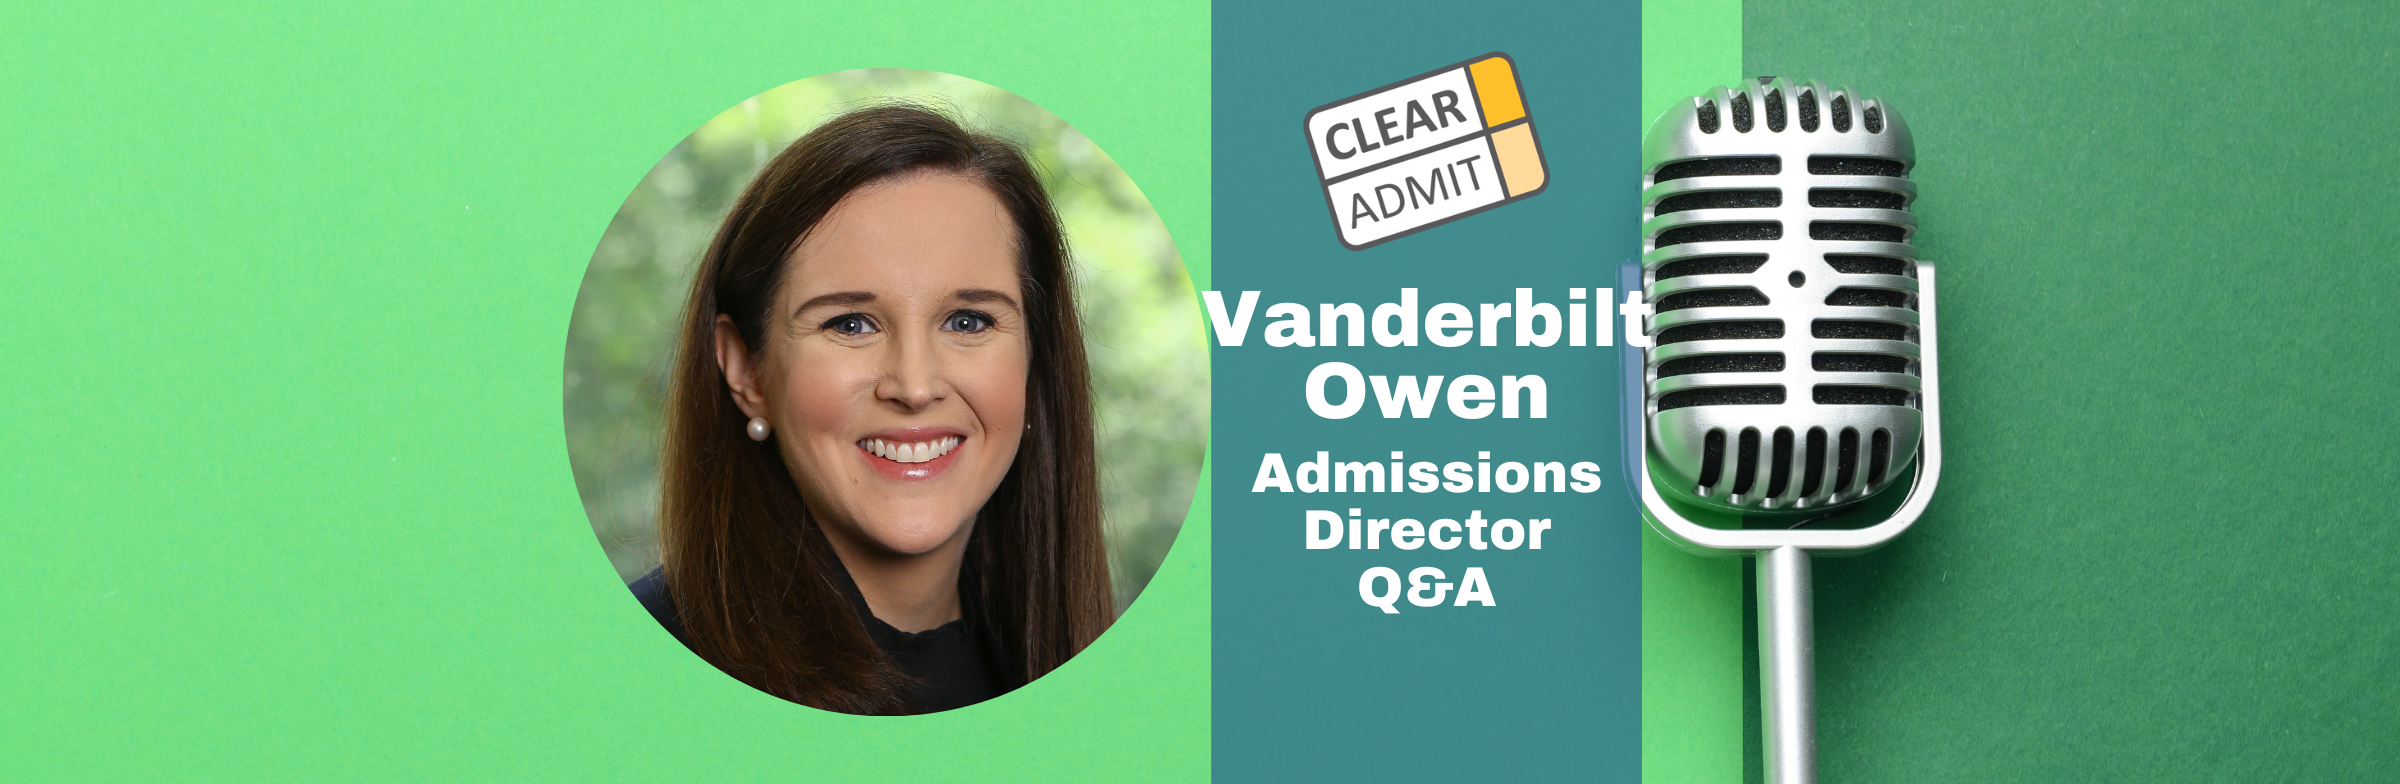 Image for Admissions Director Q&A: Bailey McChesney of Vanderbilt Owen